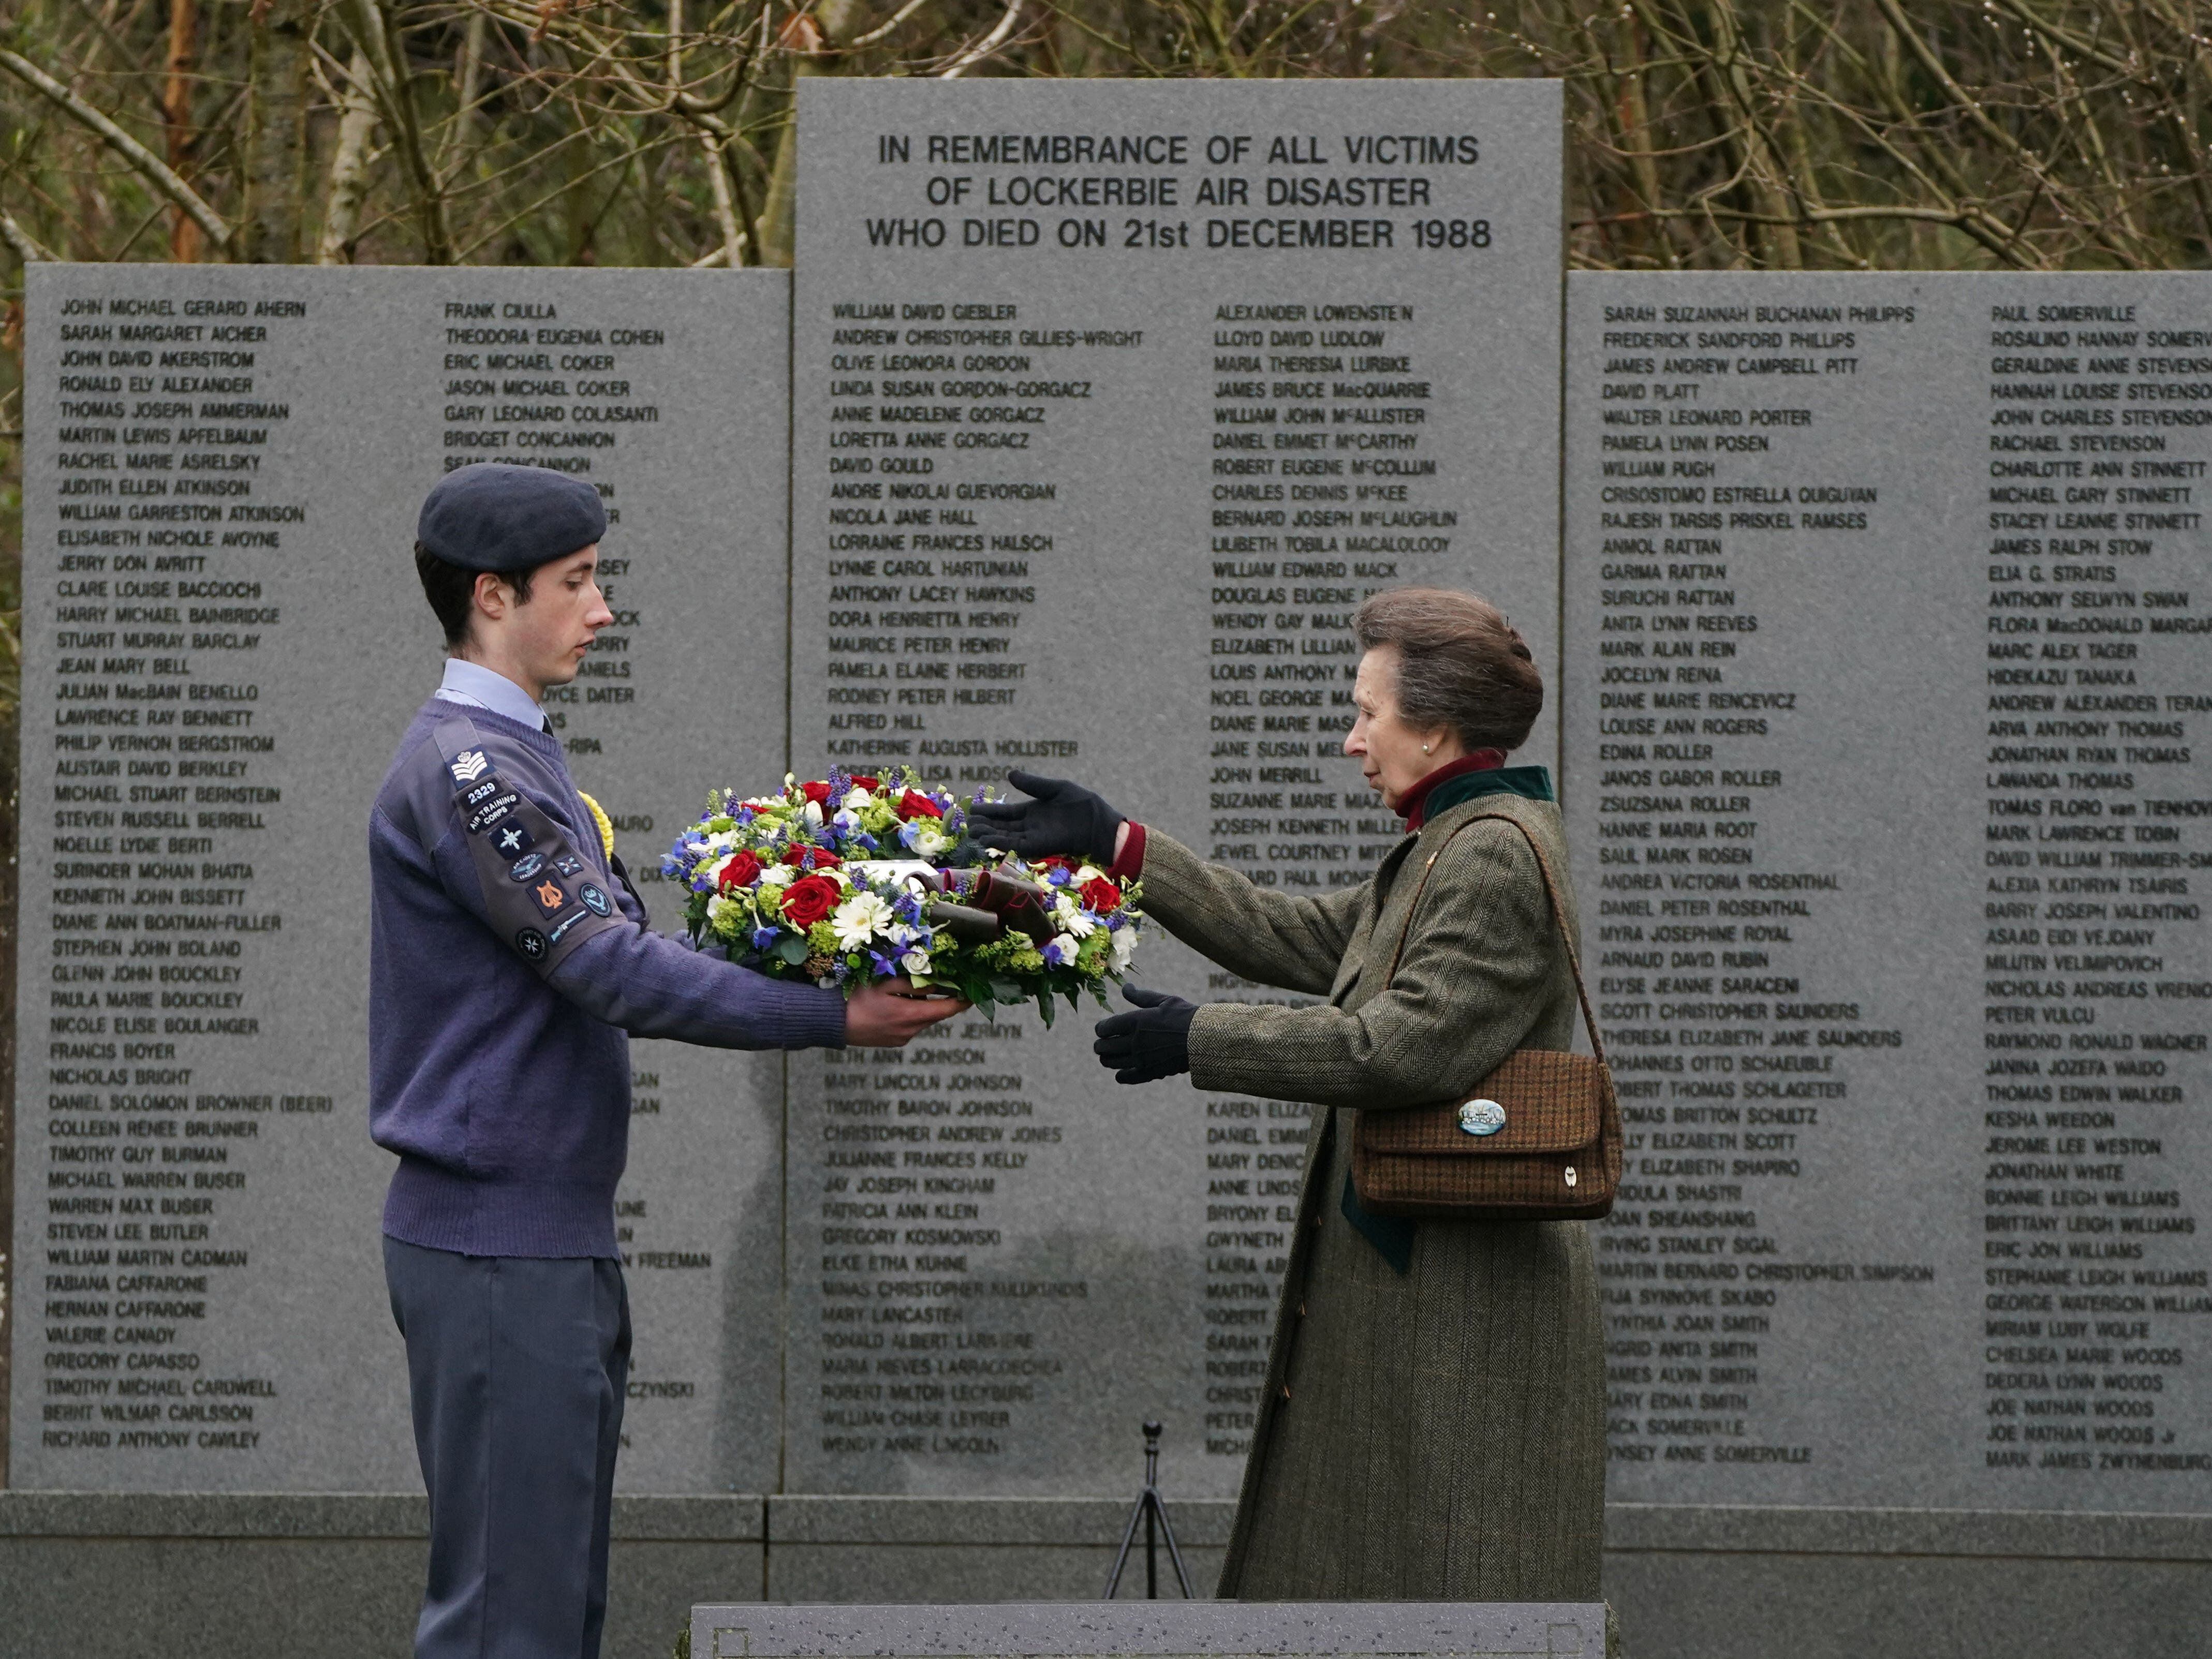 Princess Royal lays wreath in remembrance of those killed in Lockerbie bombing